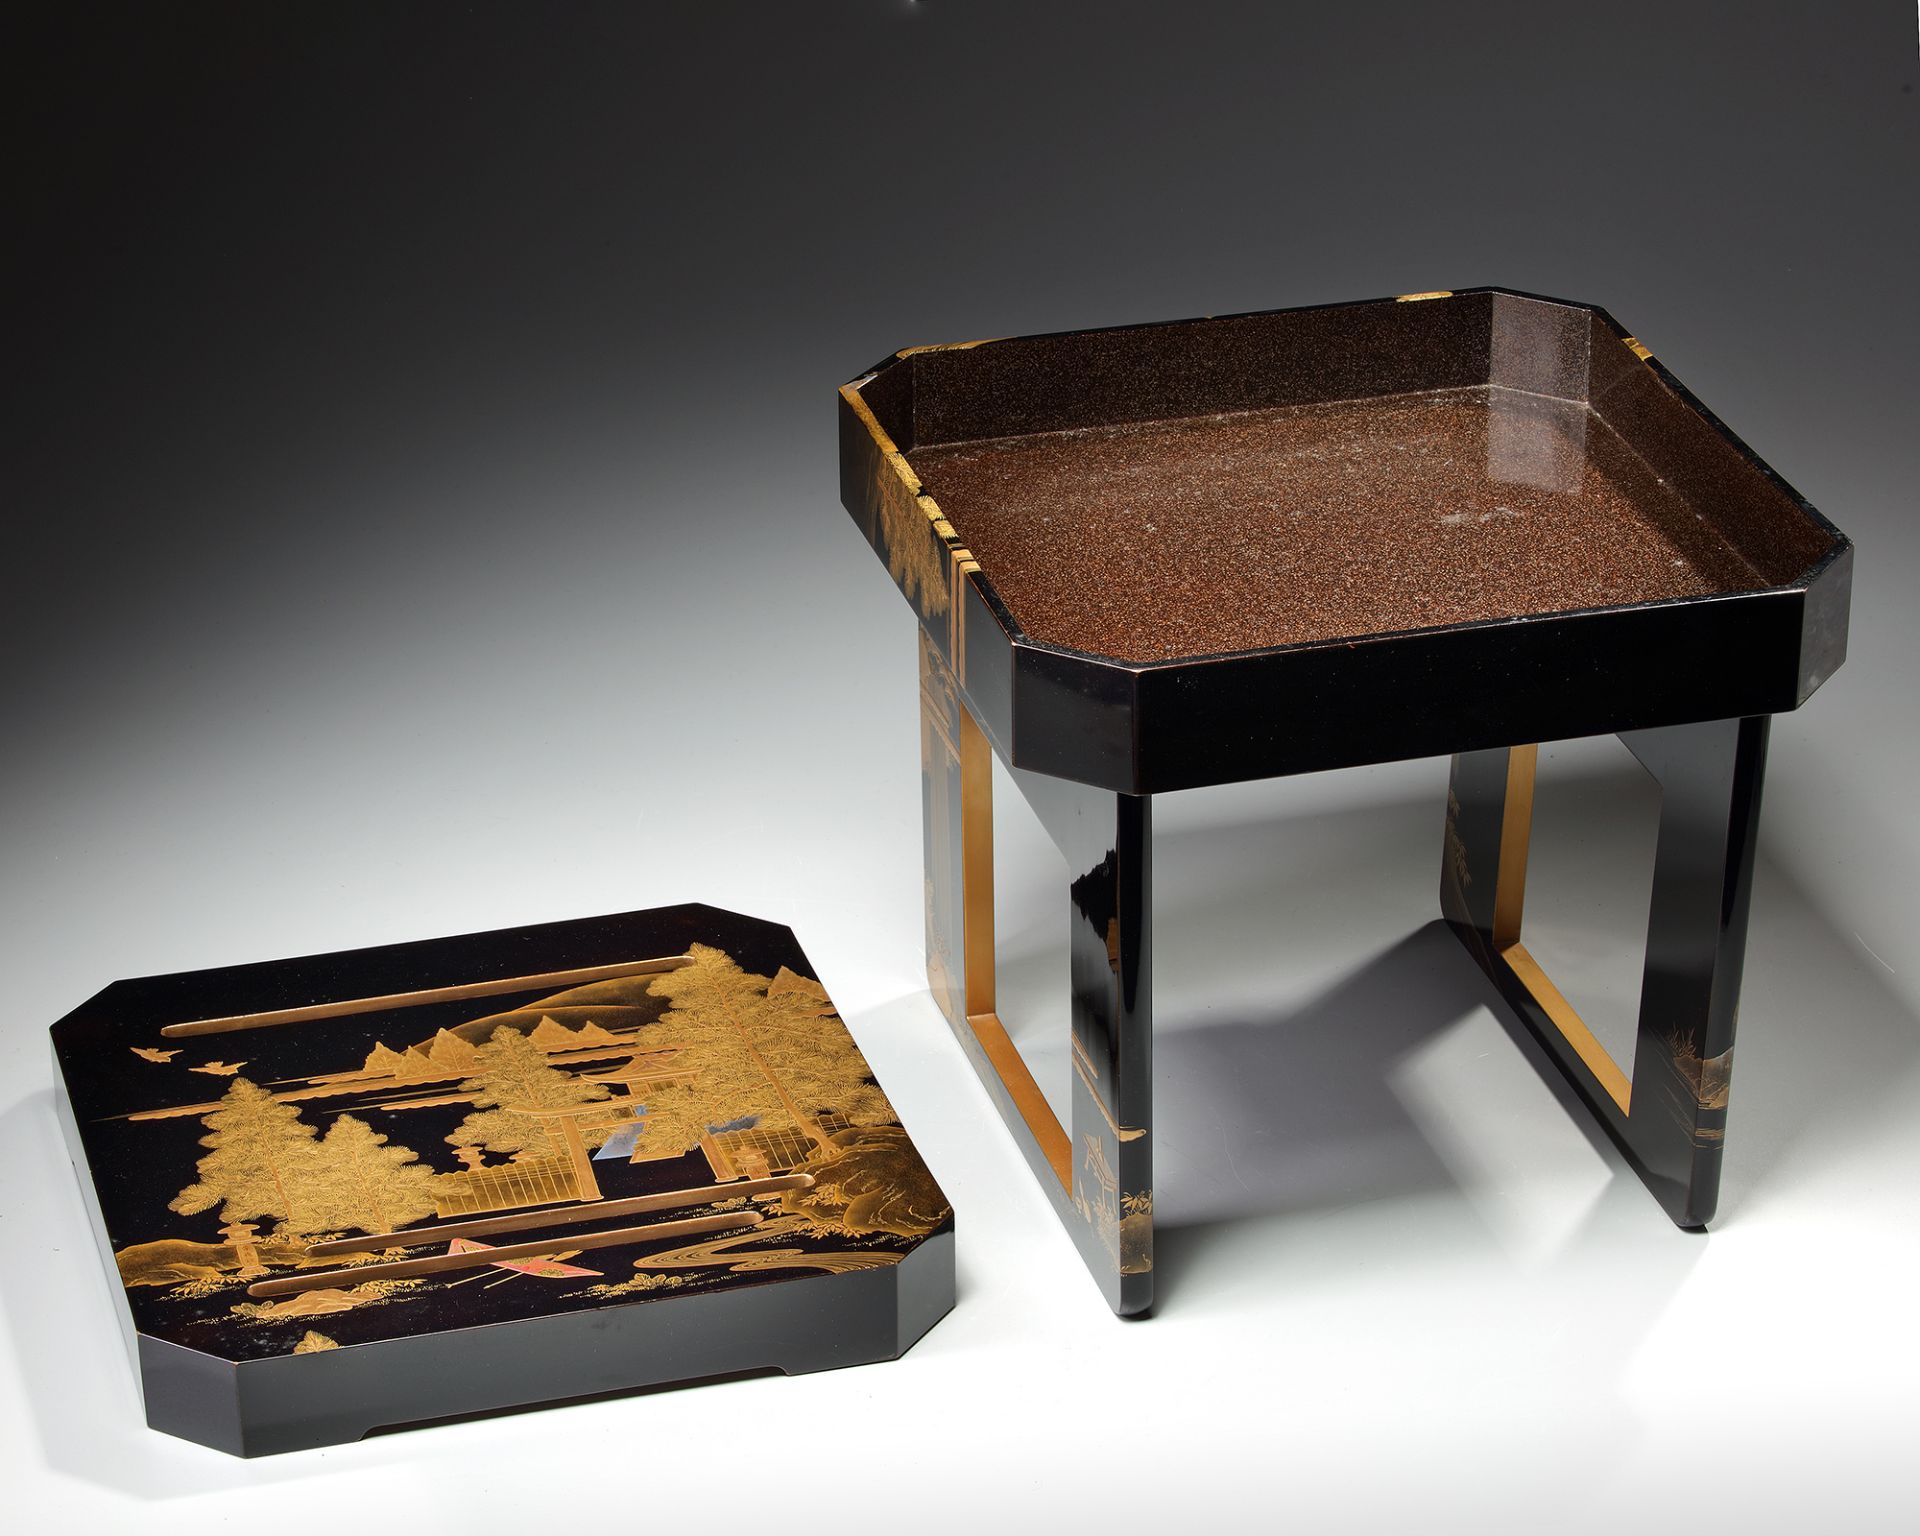 A JAPANESE SQUARE BLACK LACQUERED TABLE WITH A SEPARATE TRAY IN ITS TOP - Image 4 of 4